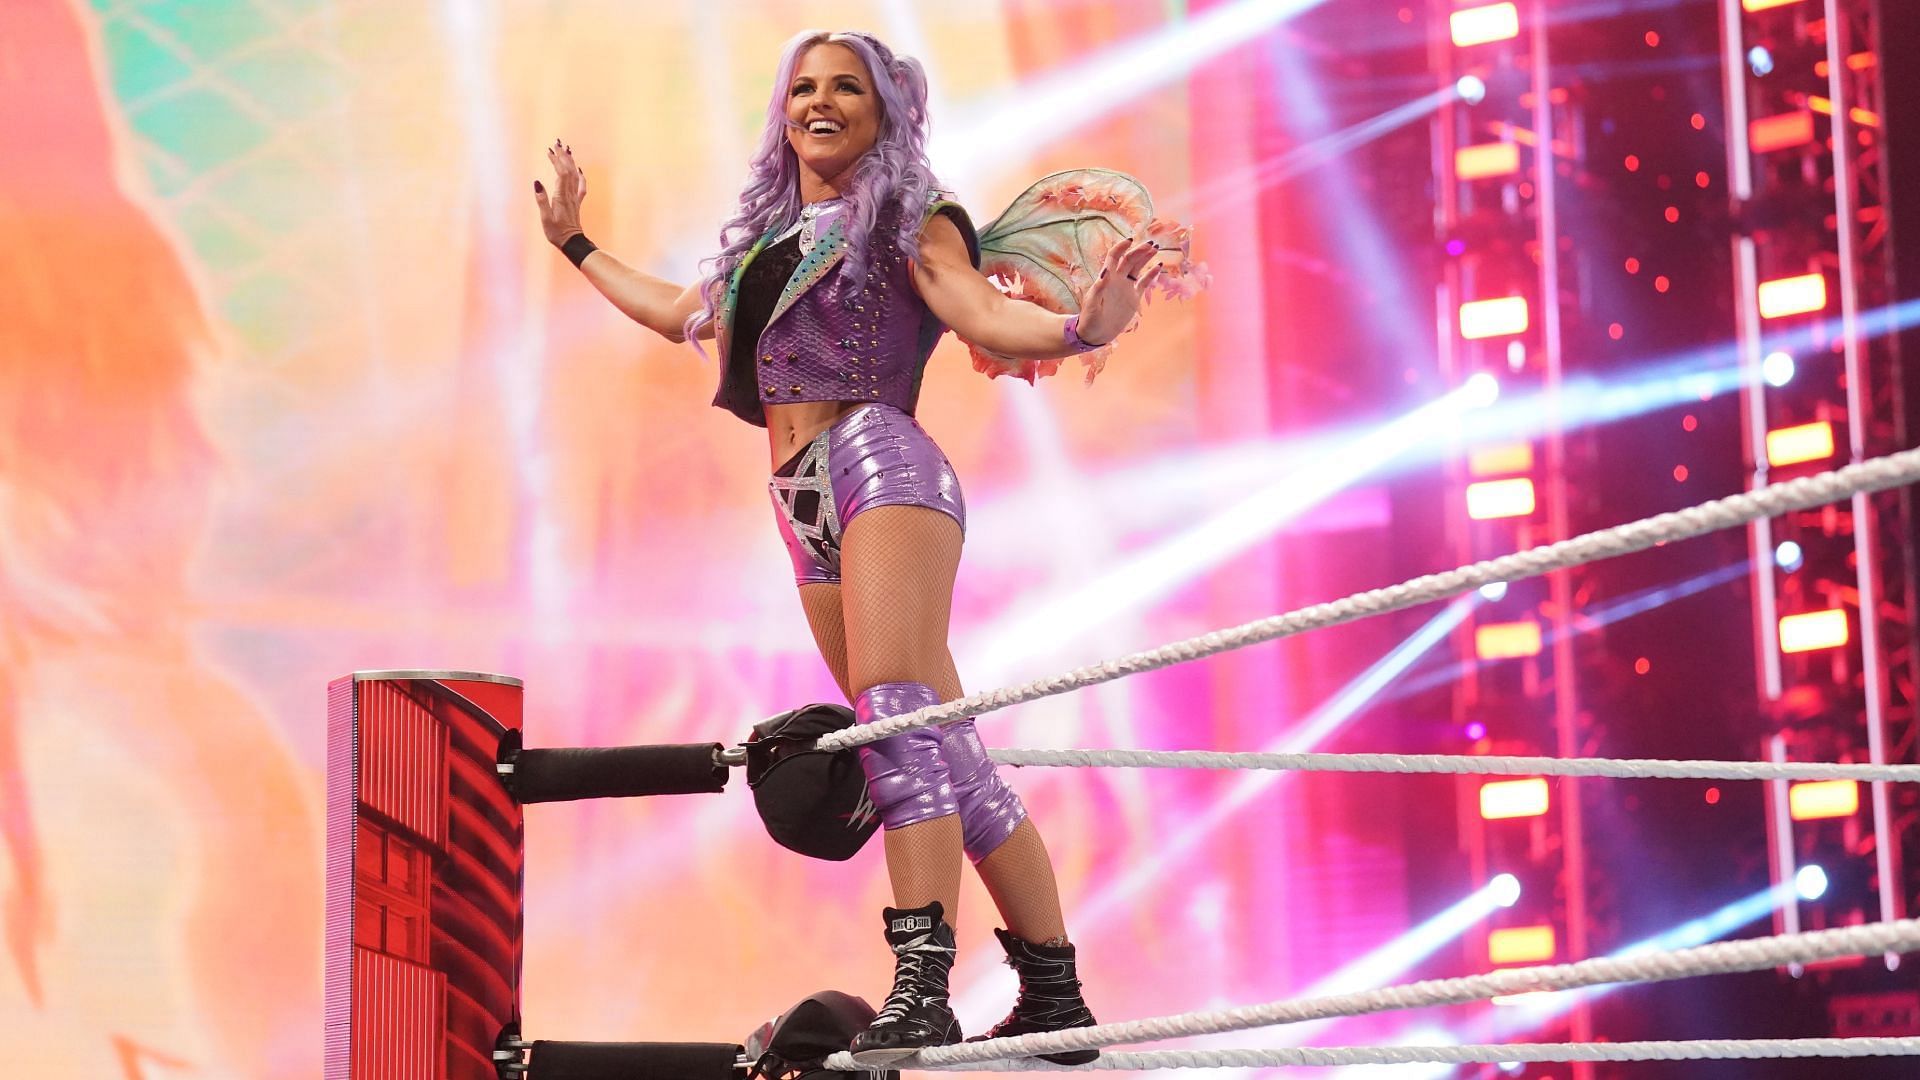 Candice LeRae returned to WWE last month